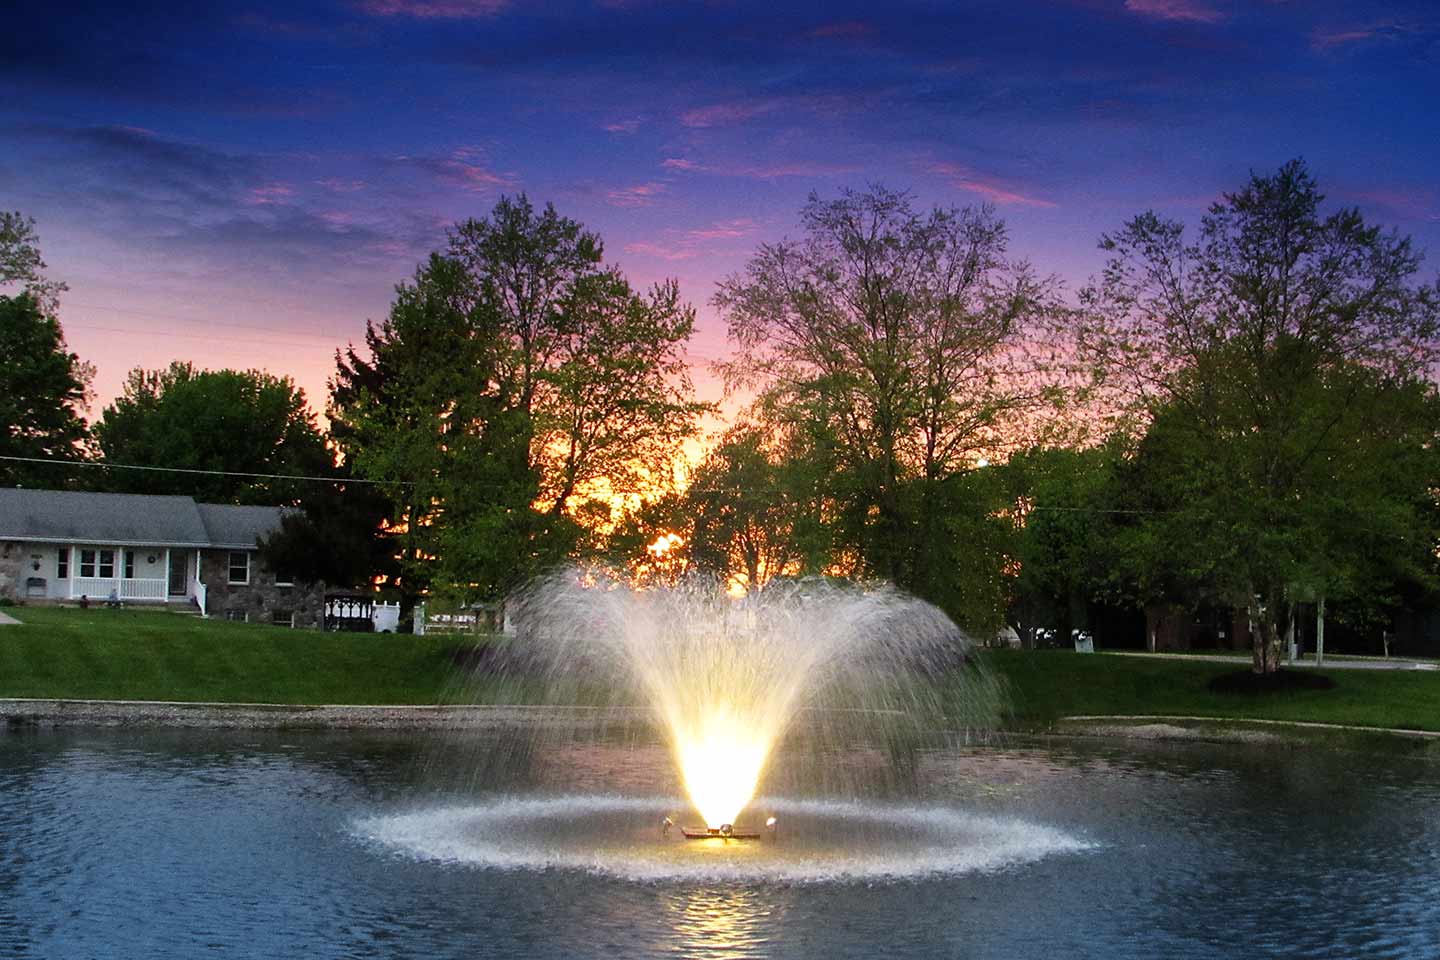 Scott Aerator Fountain Night Glo: 2 Light Warm White LED Set Scott Aerator Display Fountain Lighting Pond and Lake Floating Display Fountains By Scott Aerator 230v